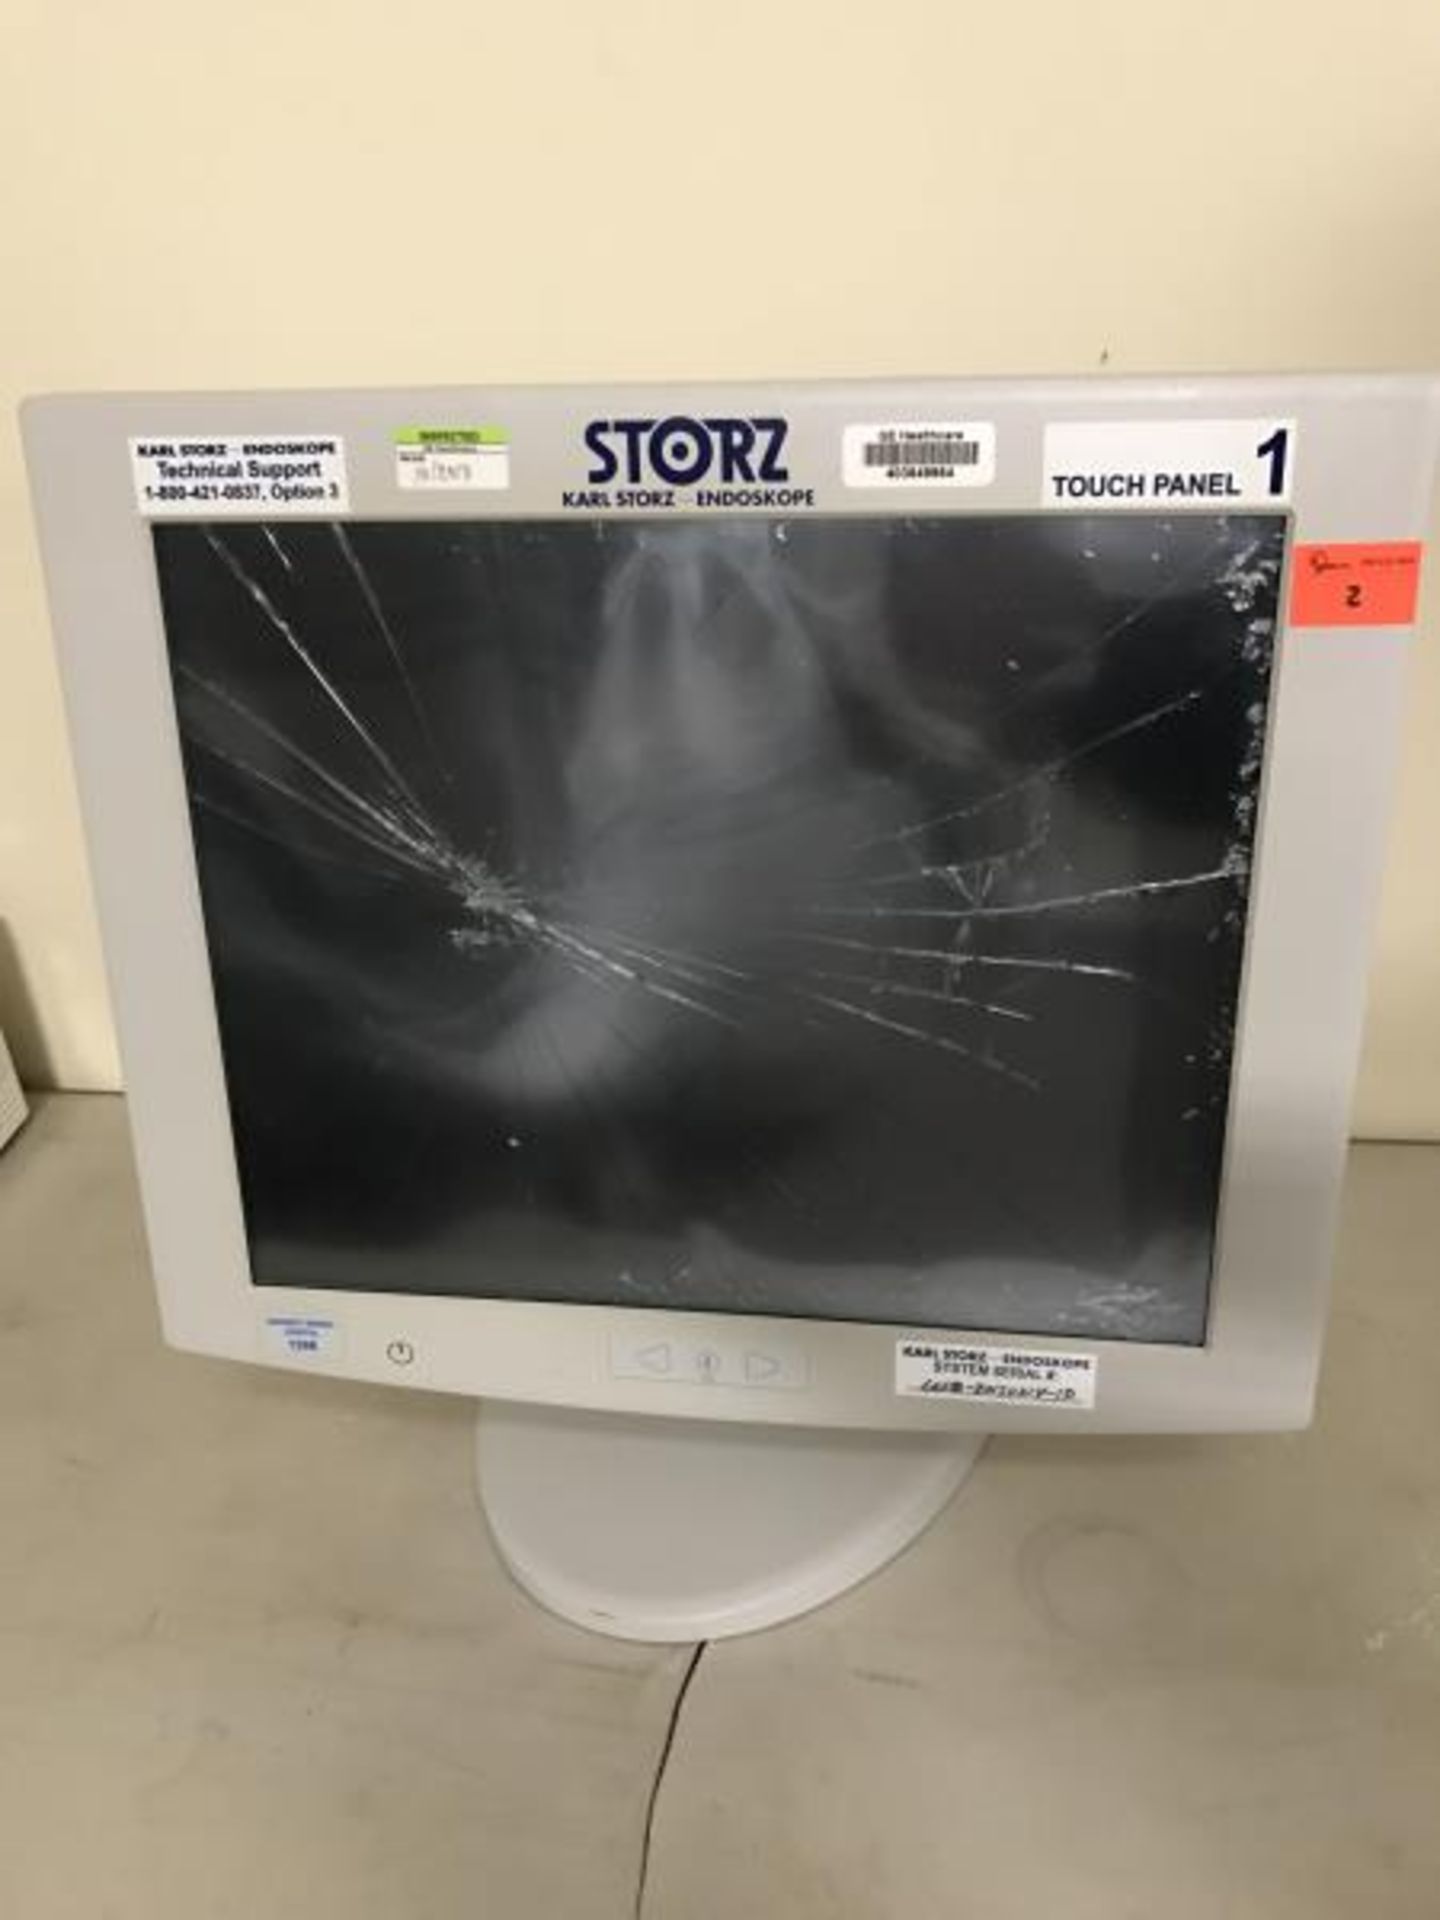 Flat Panel Monitor, Touch Screen, By NDS Surgical Imaging, Model: V3C-SX19-R110, Part # 90X0530-B,